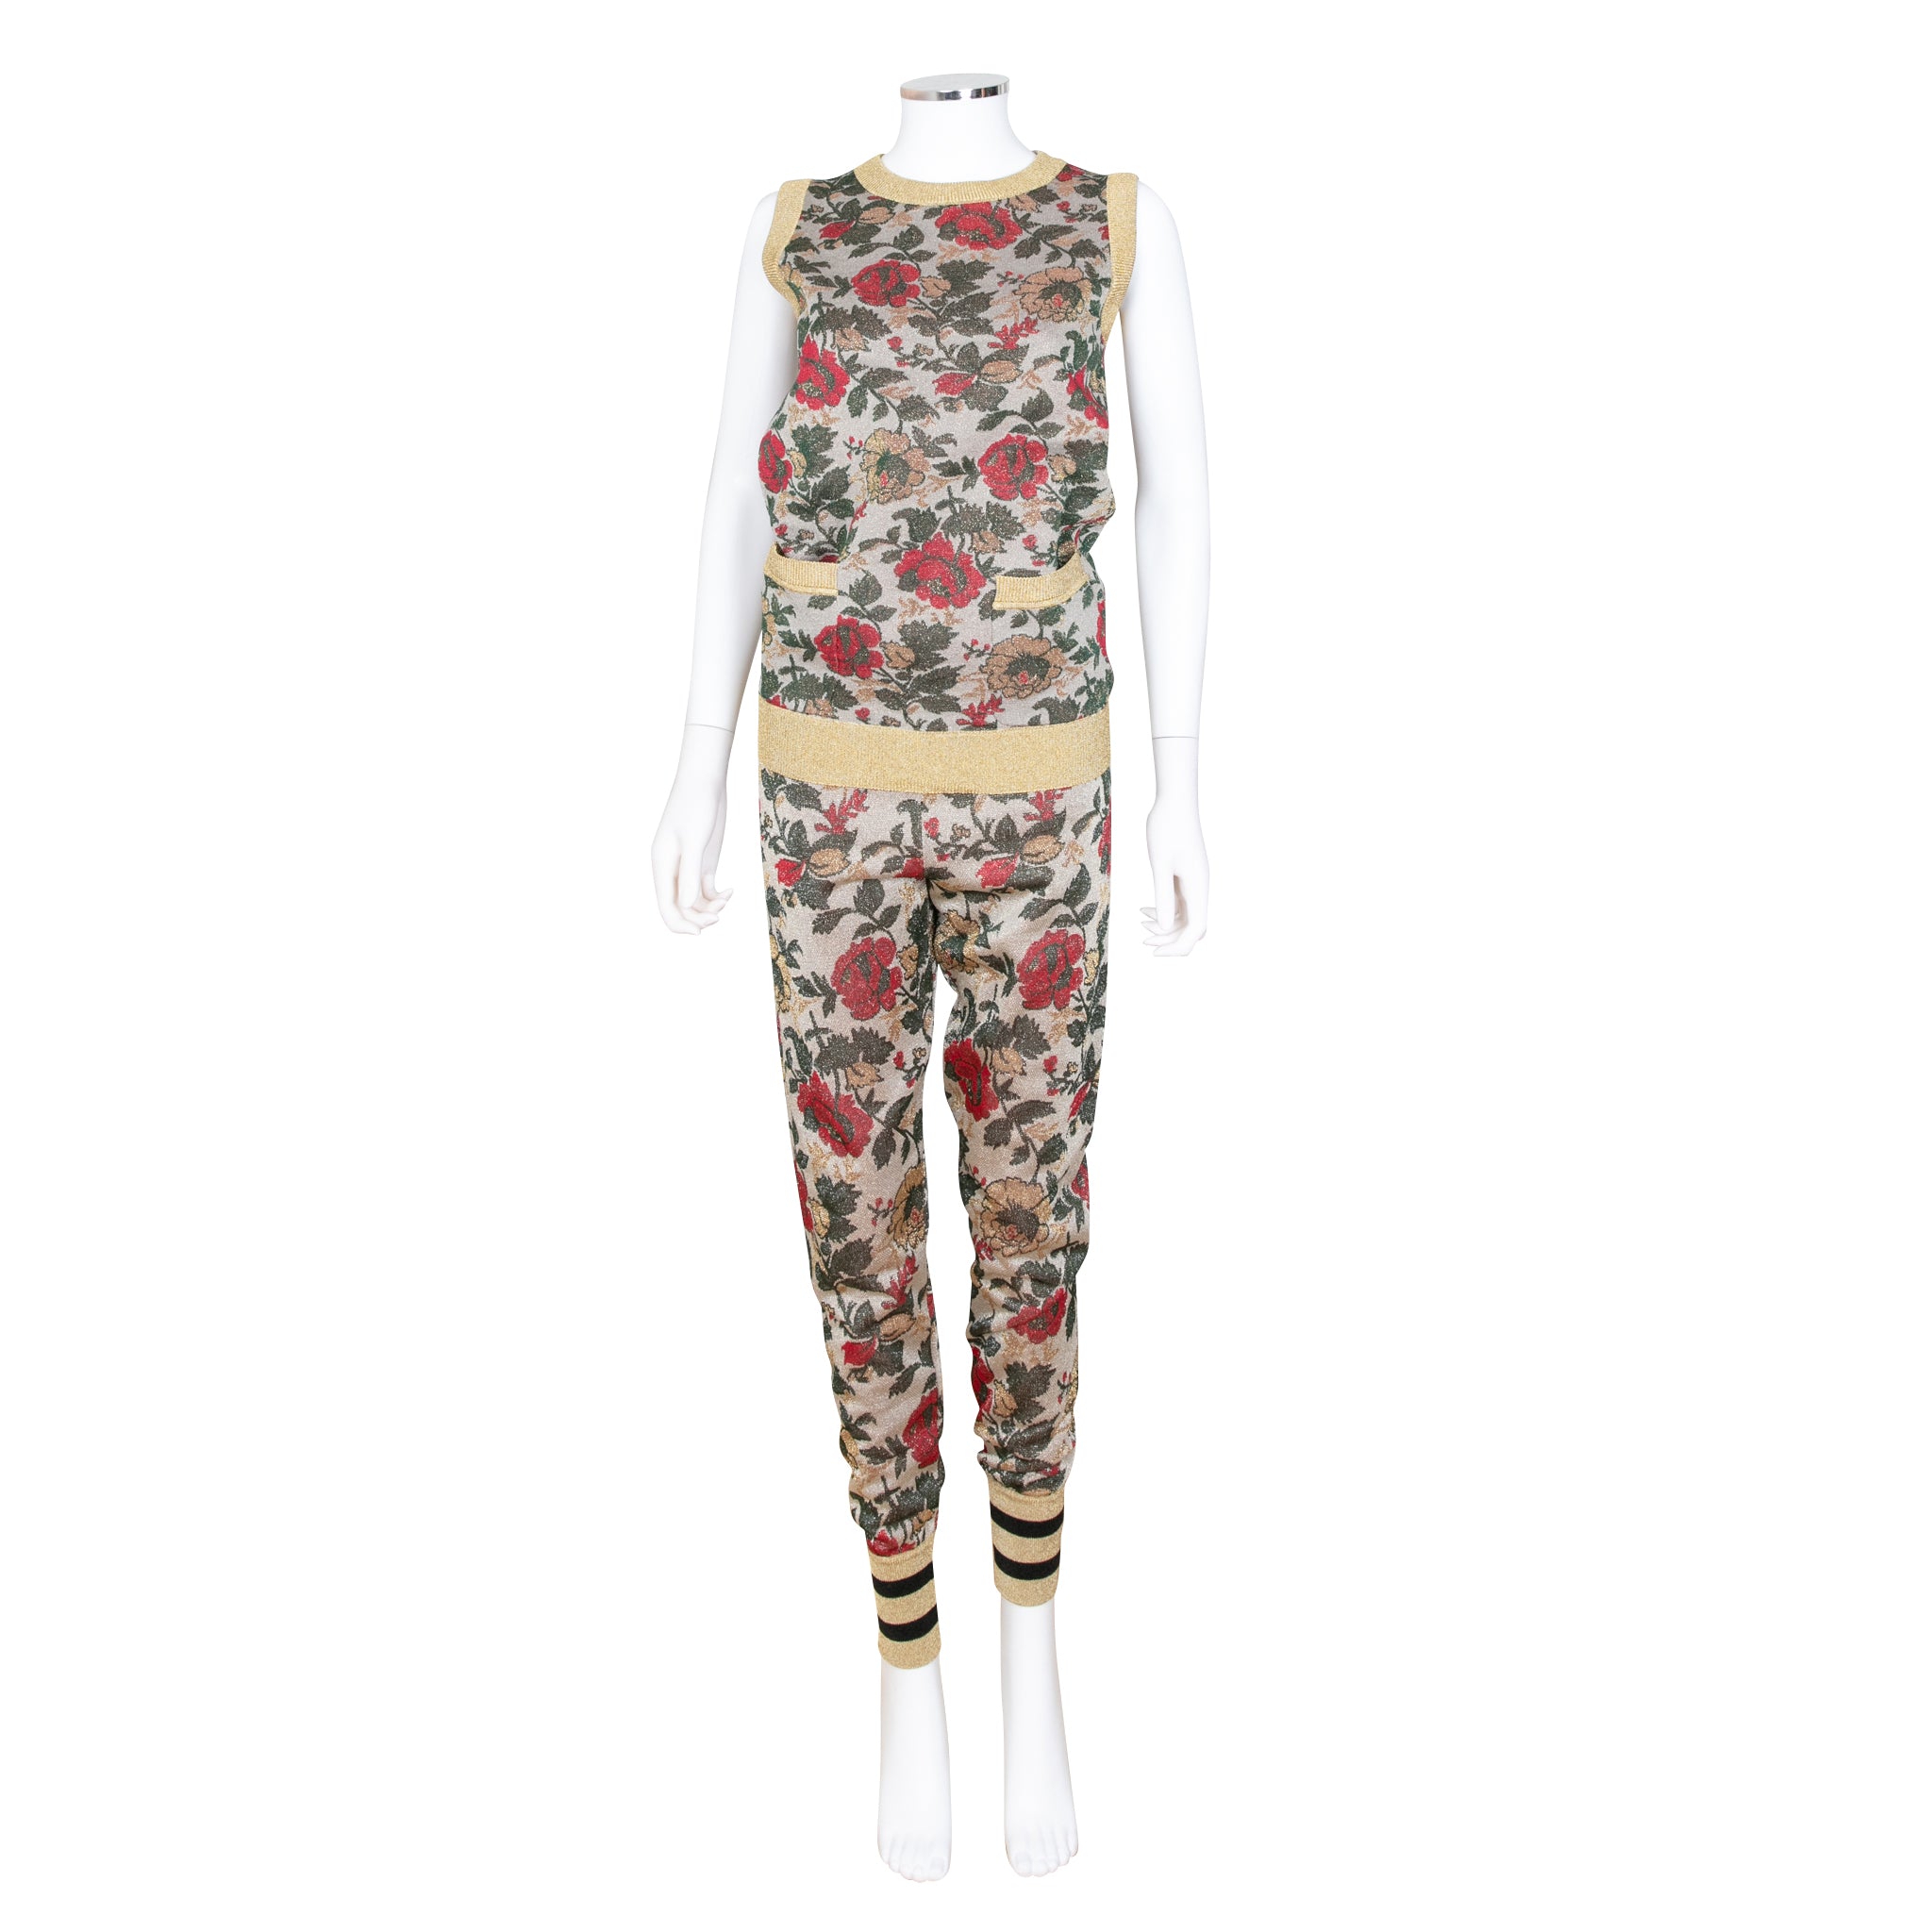 Gucci Metallic Floral Print Top and 